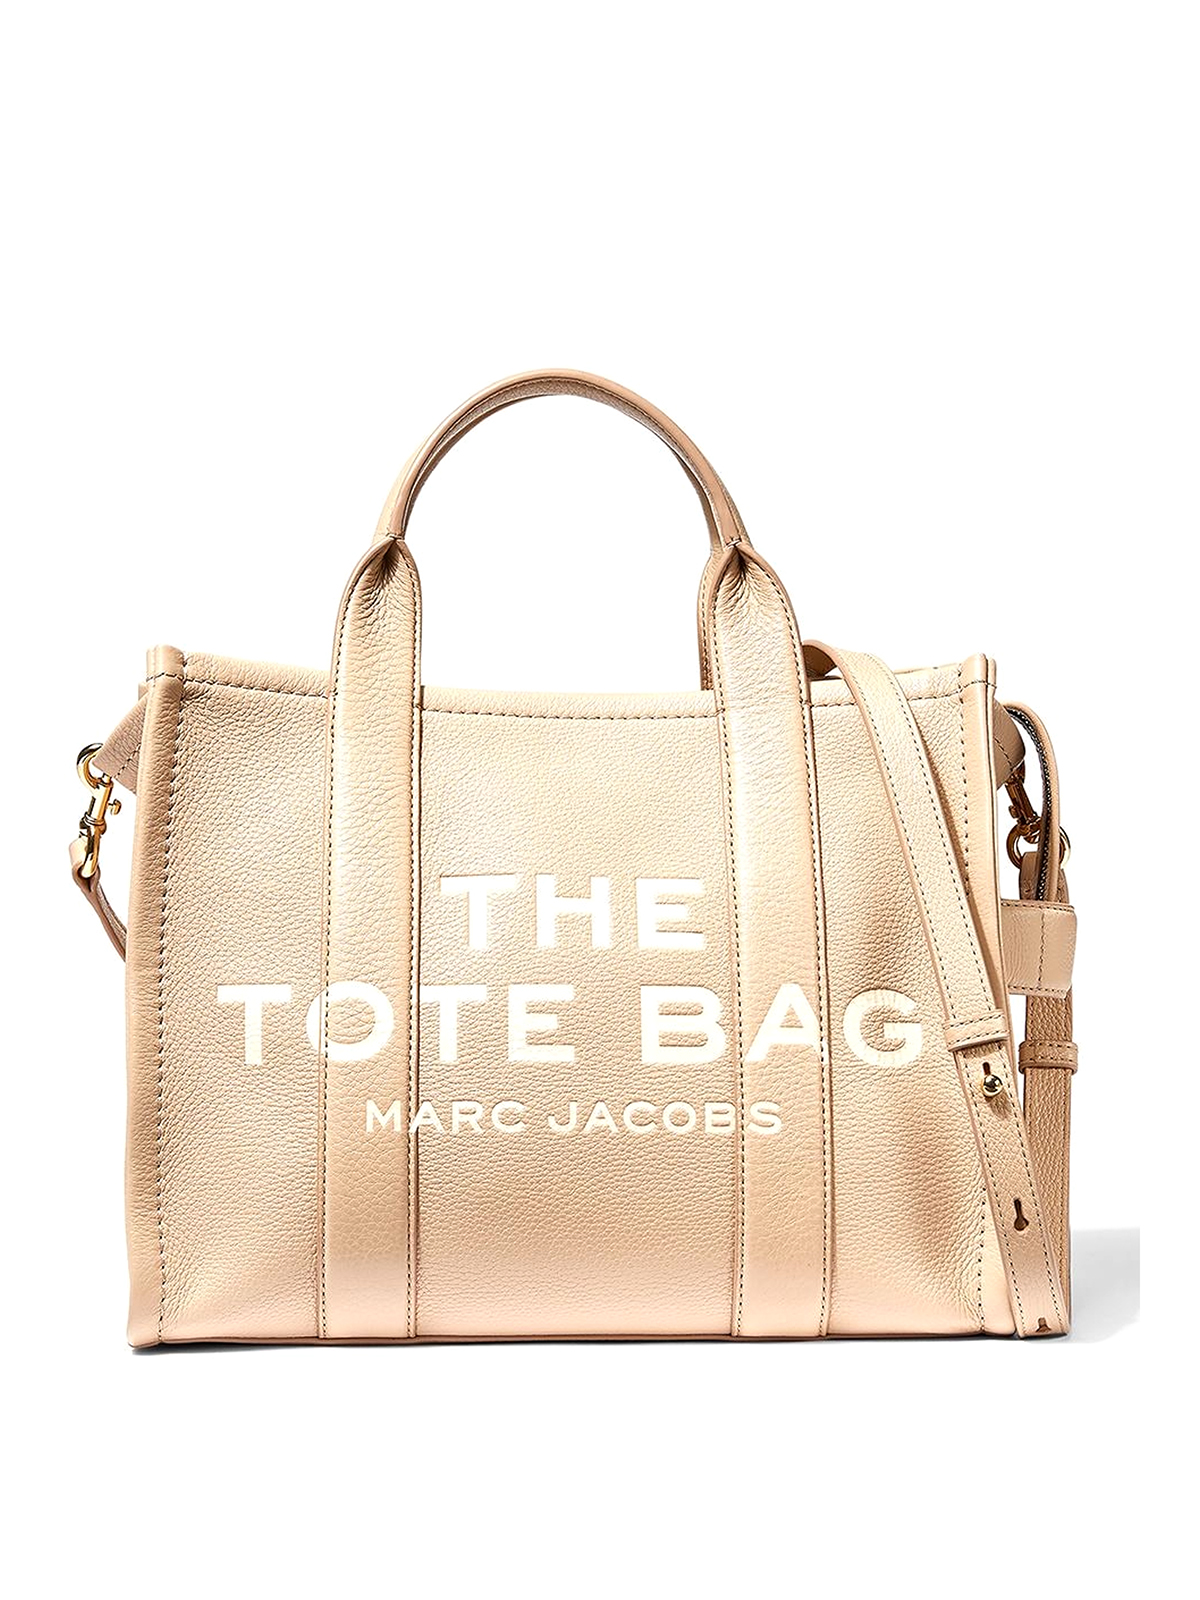 MARC JACOBS, Small Tote Bag, Women, Tote Bags